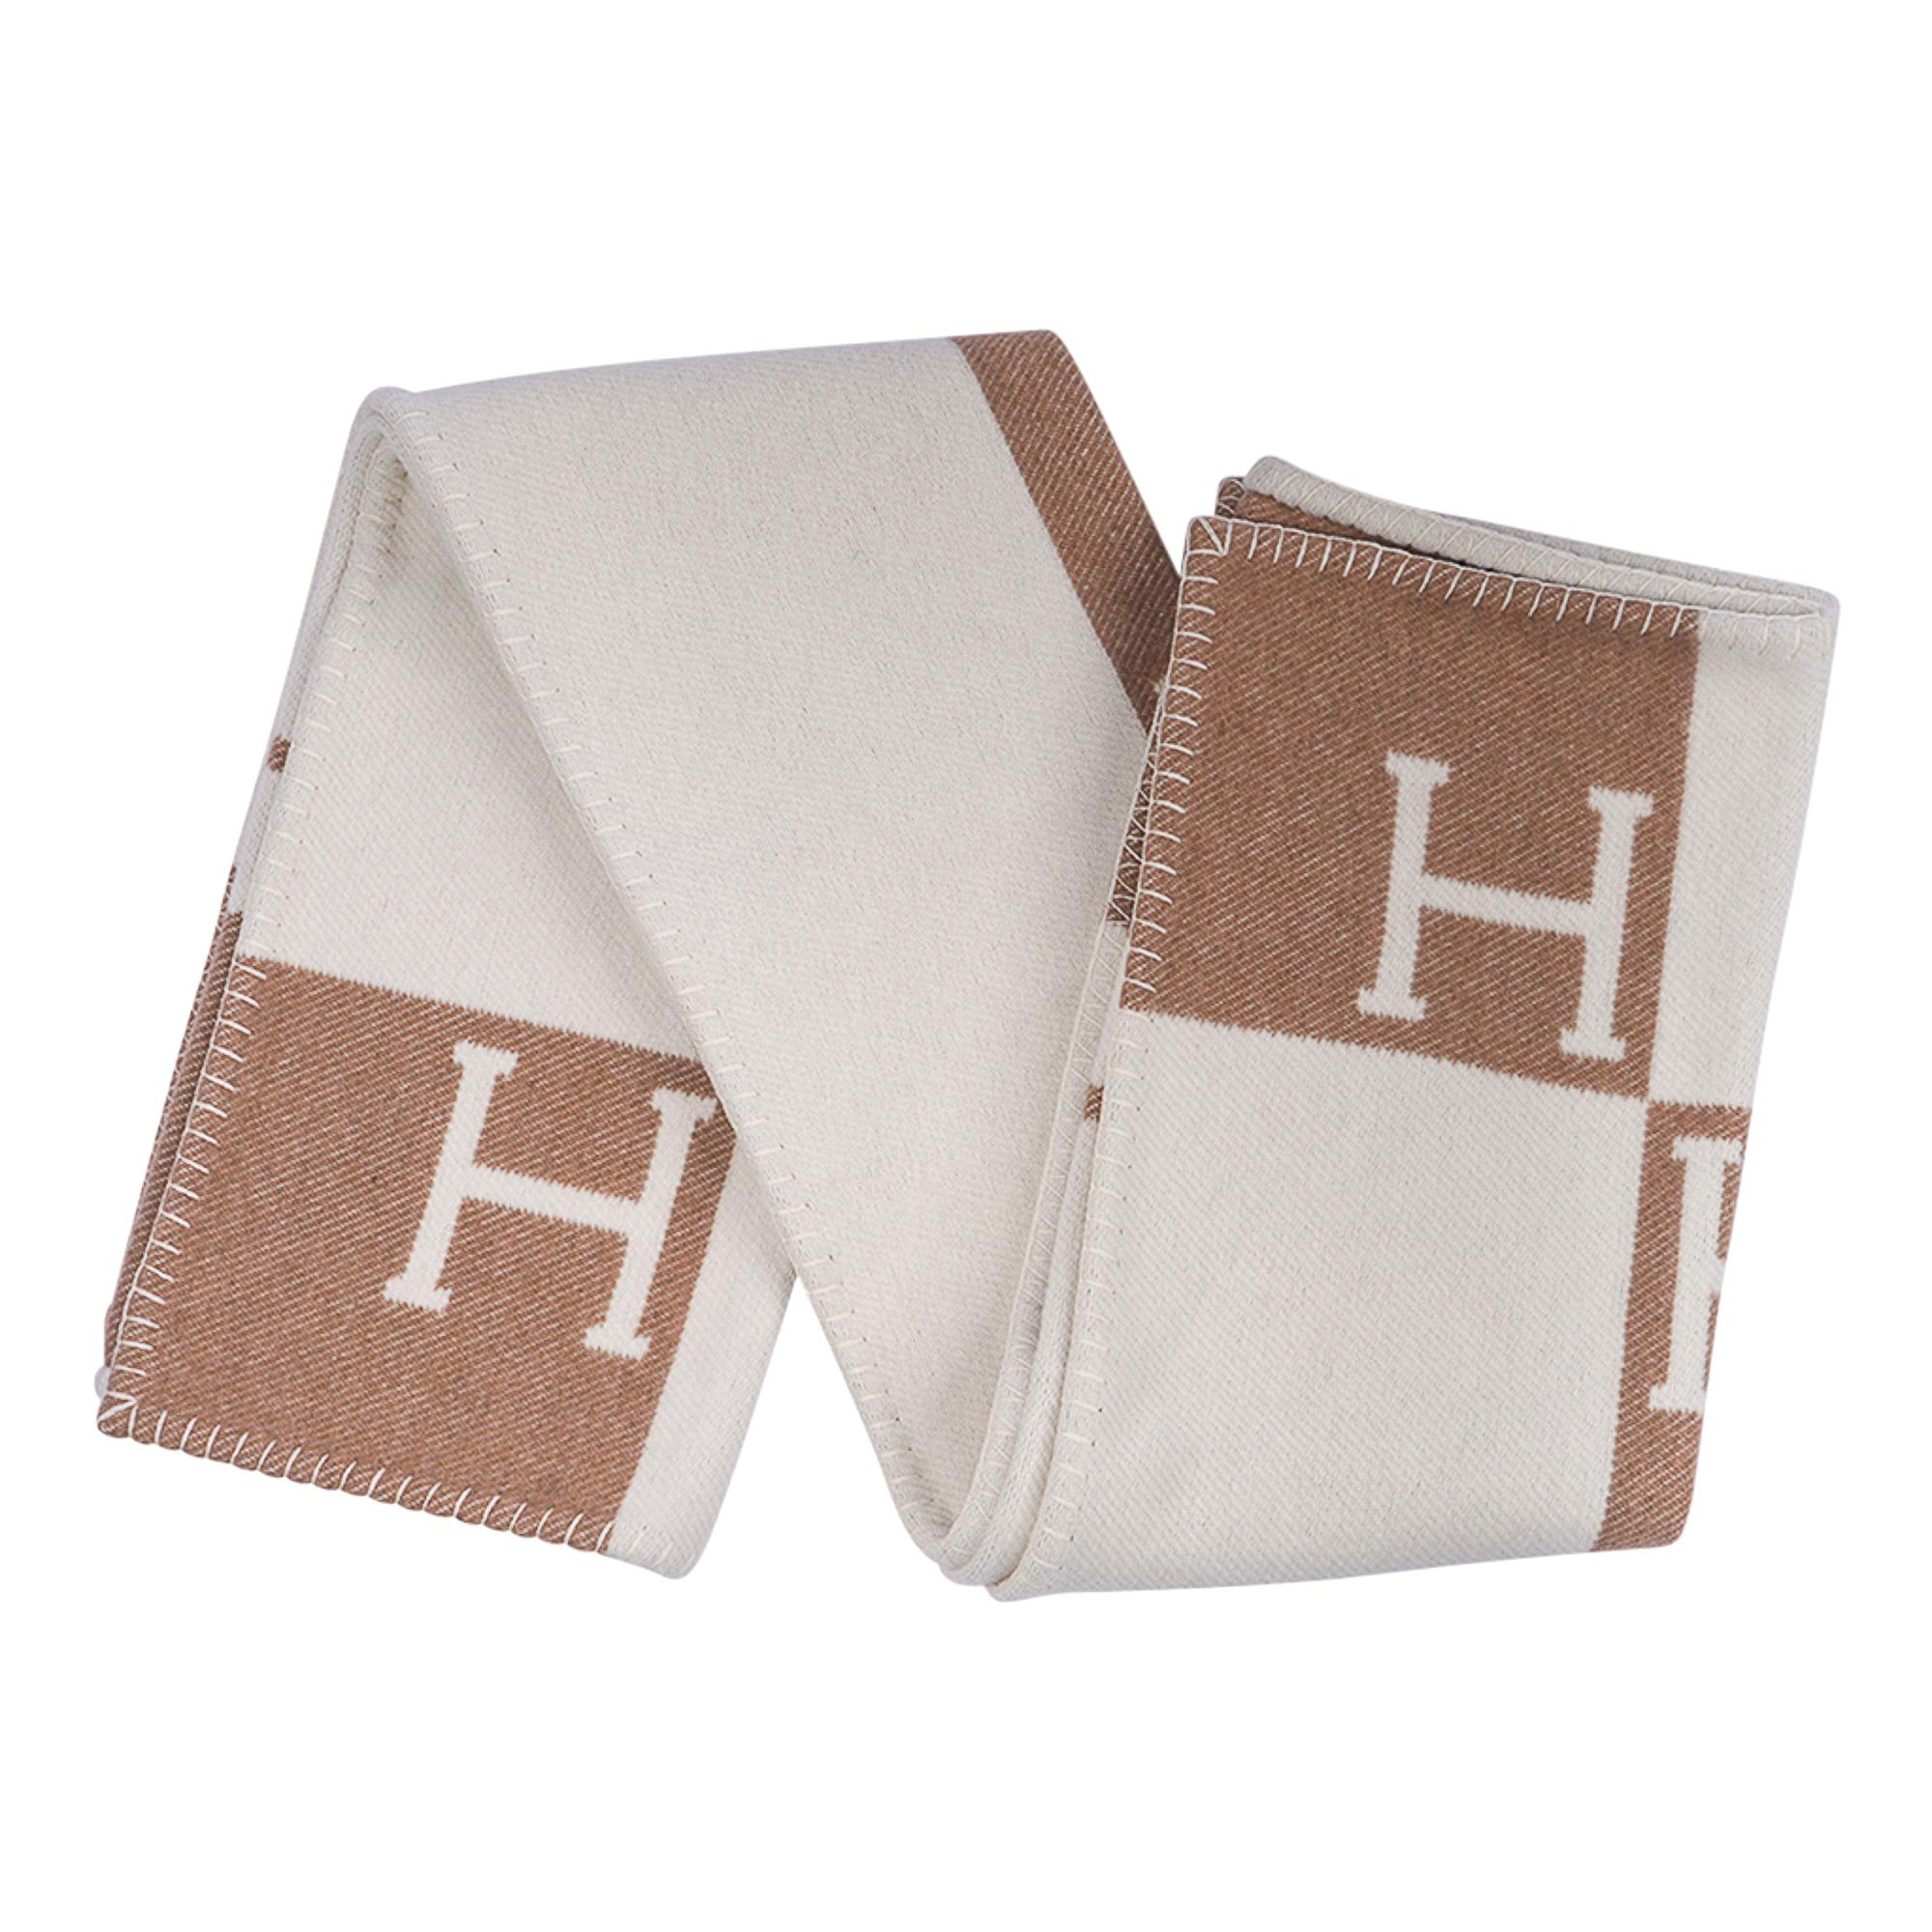 Mightychic offers a guaranteed authentic Hermes Avalon Baby blanket featured in Rose Airelle and Blanc.
Created from 90% Merino Wool and 10% cashmere and has whip stitch edges.
What a beautiful treat for a baby!
New or Pristine Store Fresh